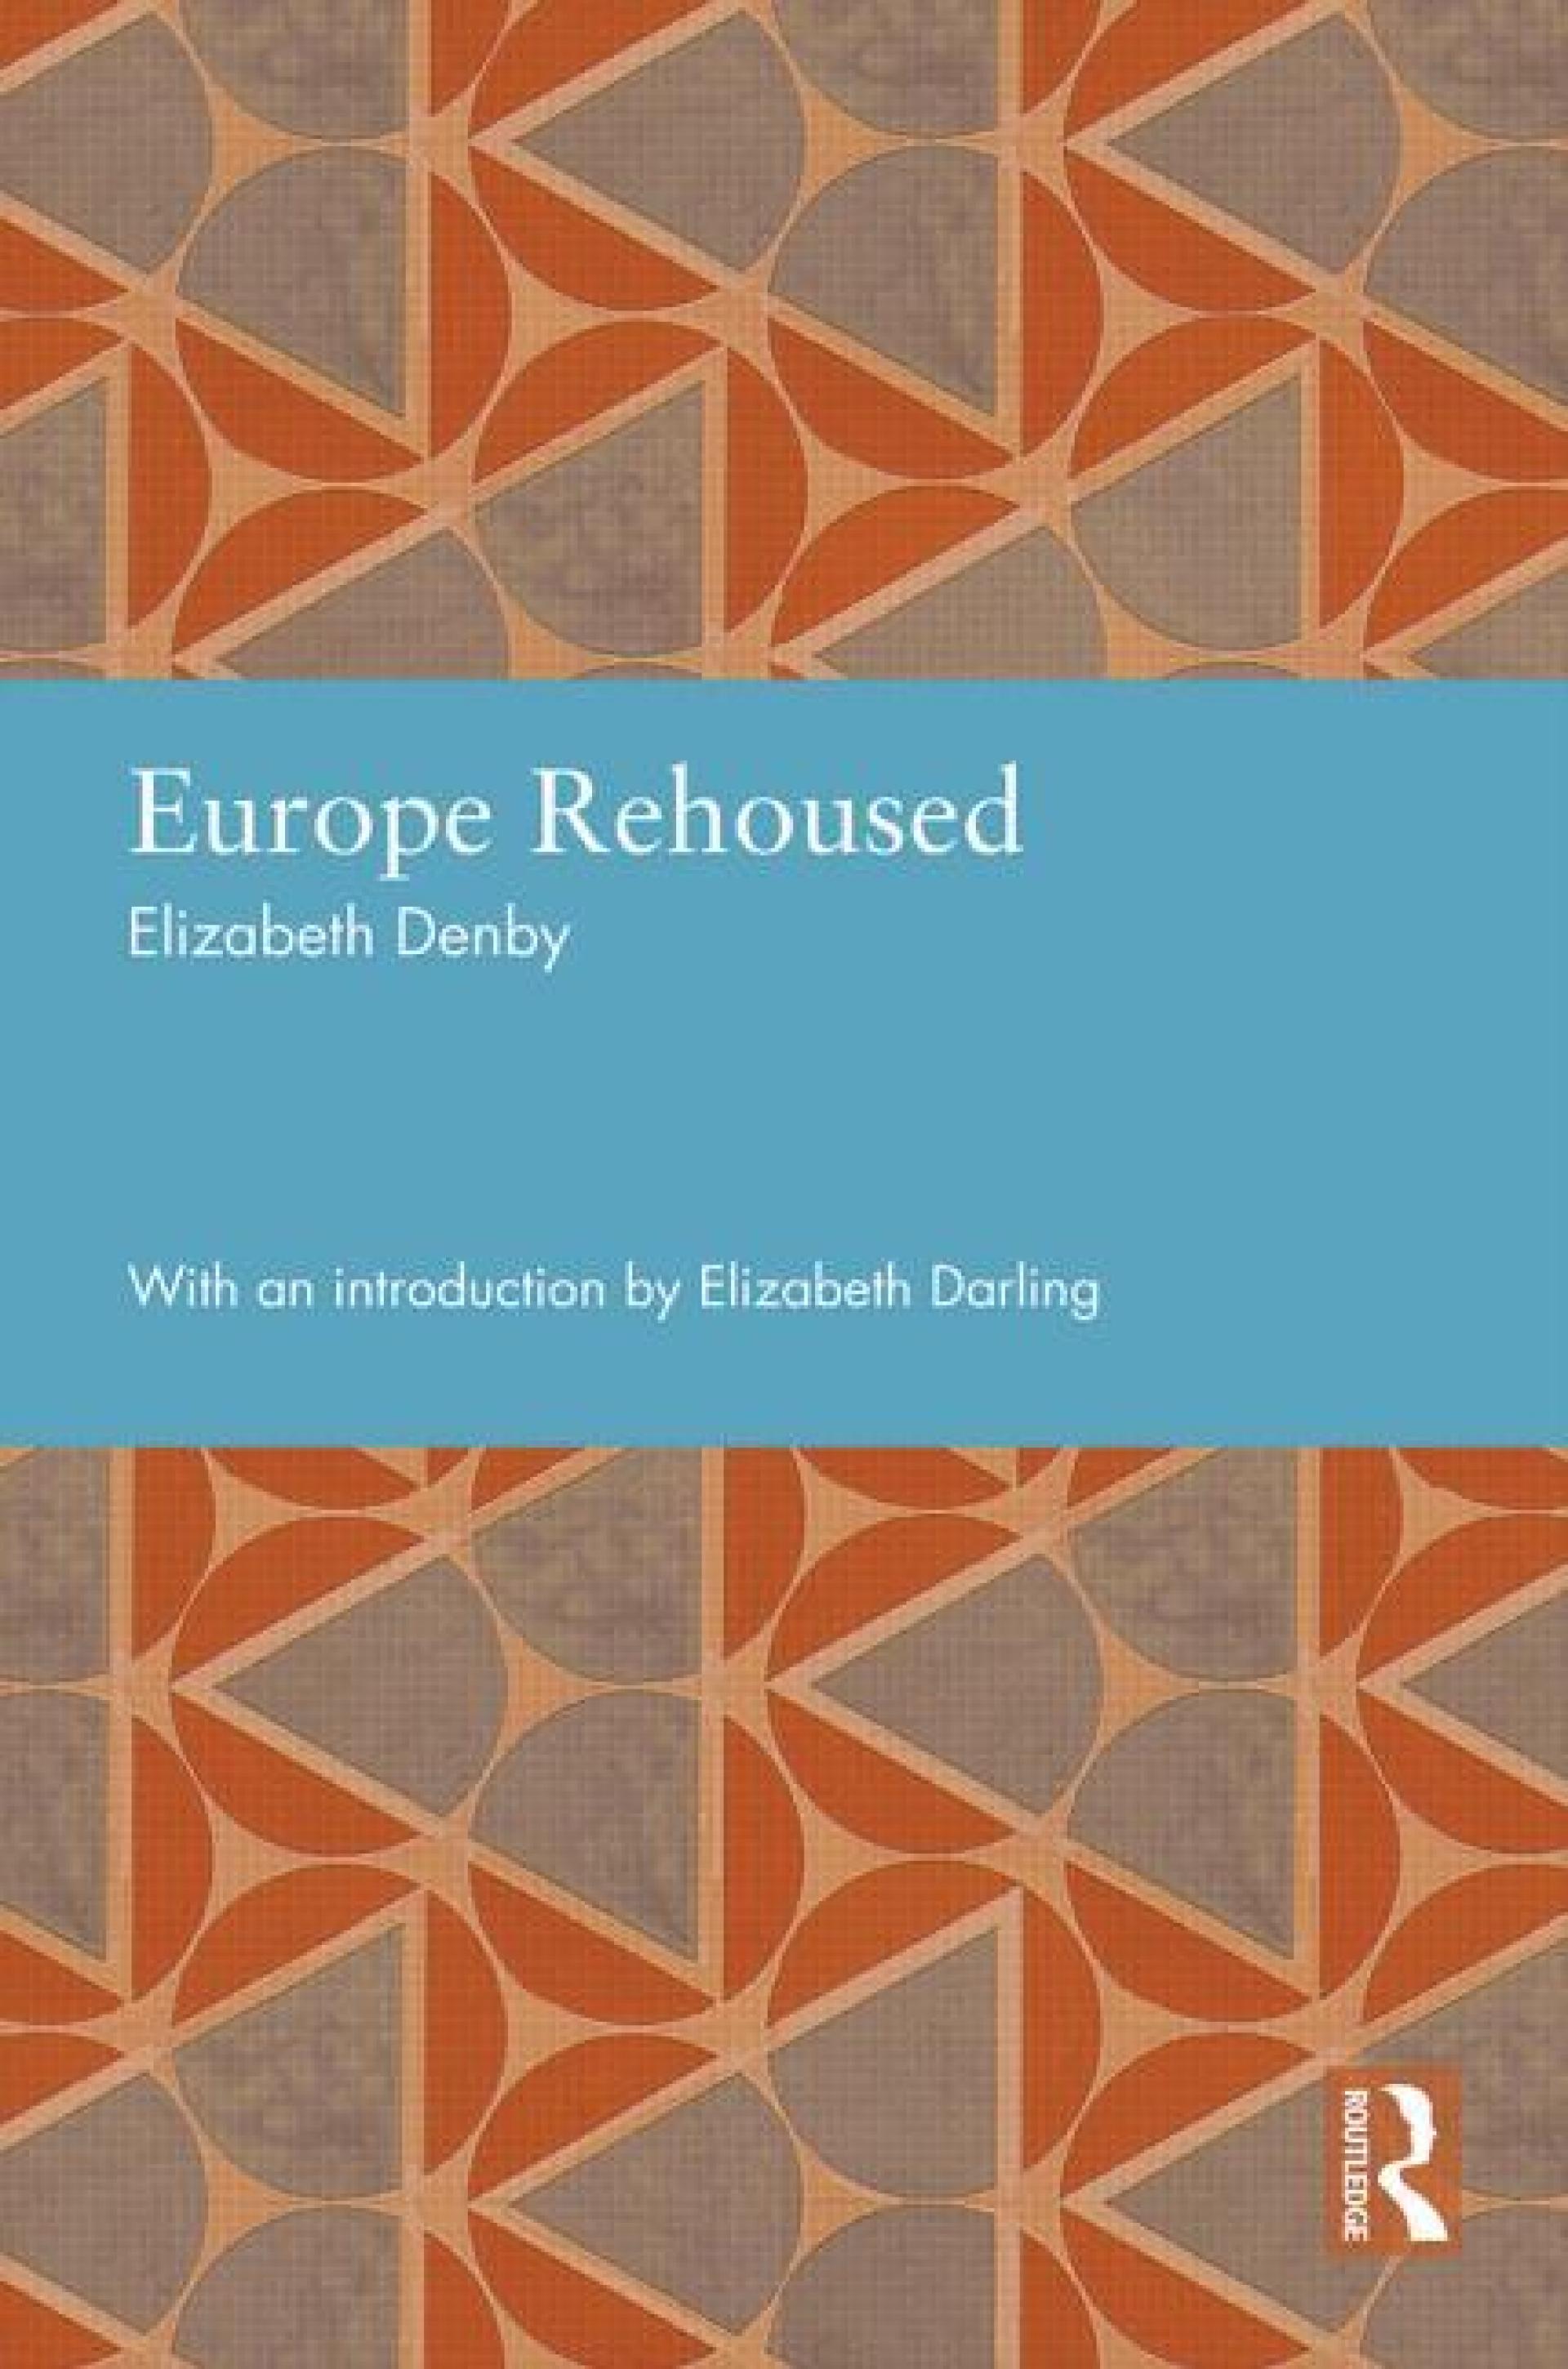 Denby contributed to the discussion about residential planning with the book Europe Rehoused.